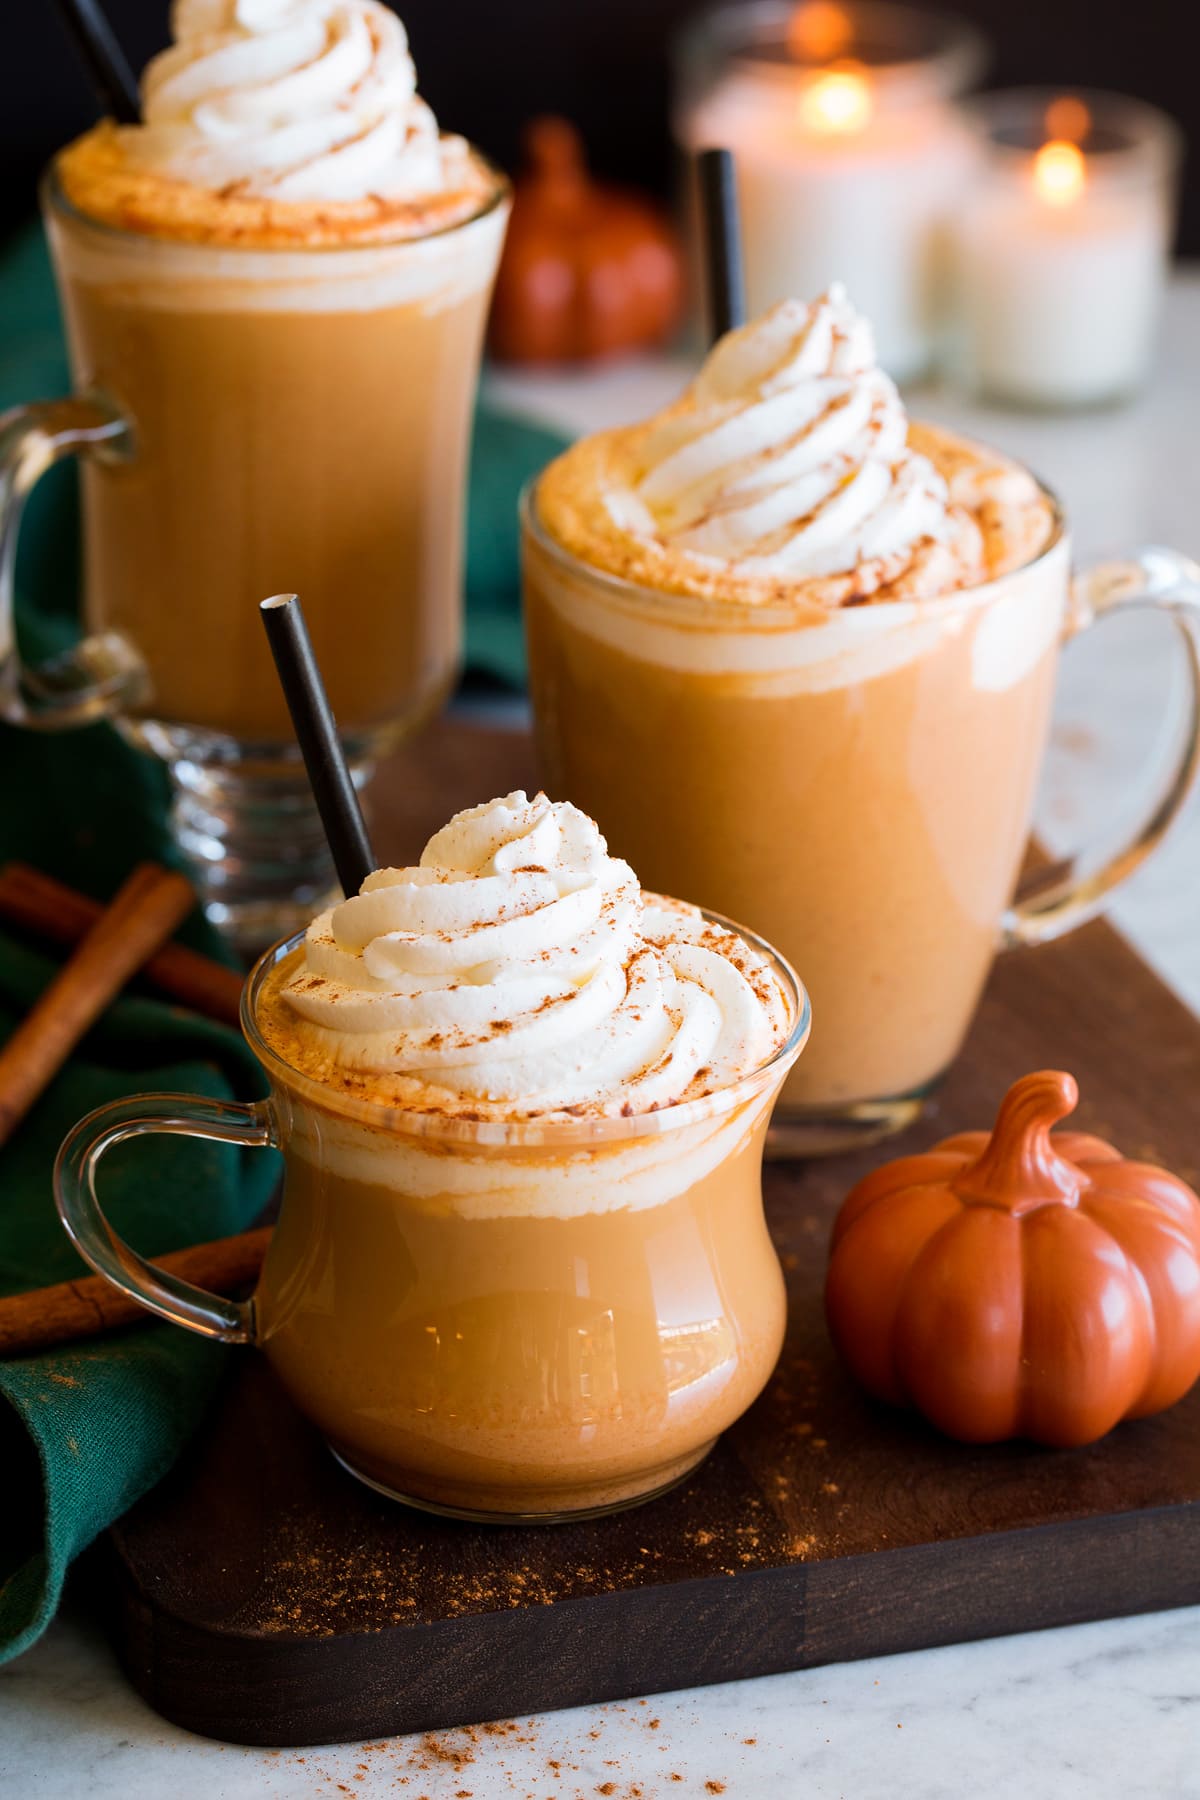 Three pumkpin spice lattes with a decorative pumpkin to the side, cinnamon sticks and candles in the background. Lattes are topped with whipped cream and pumpkin spice.